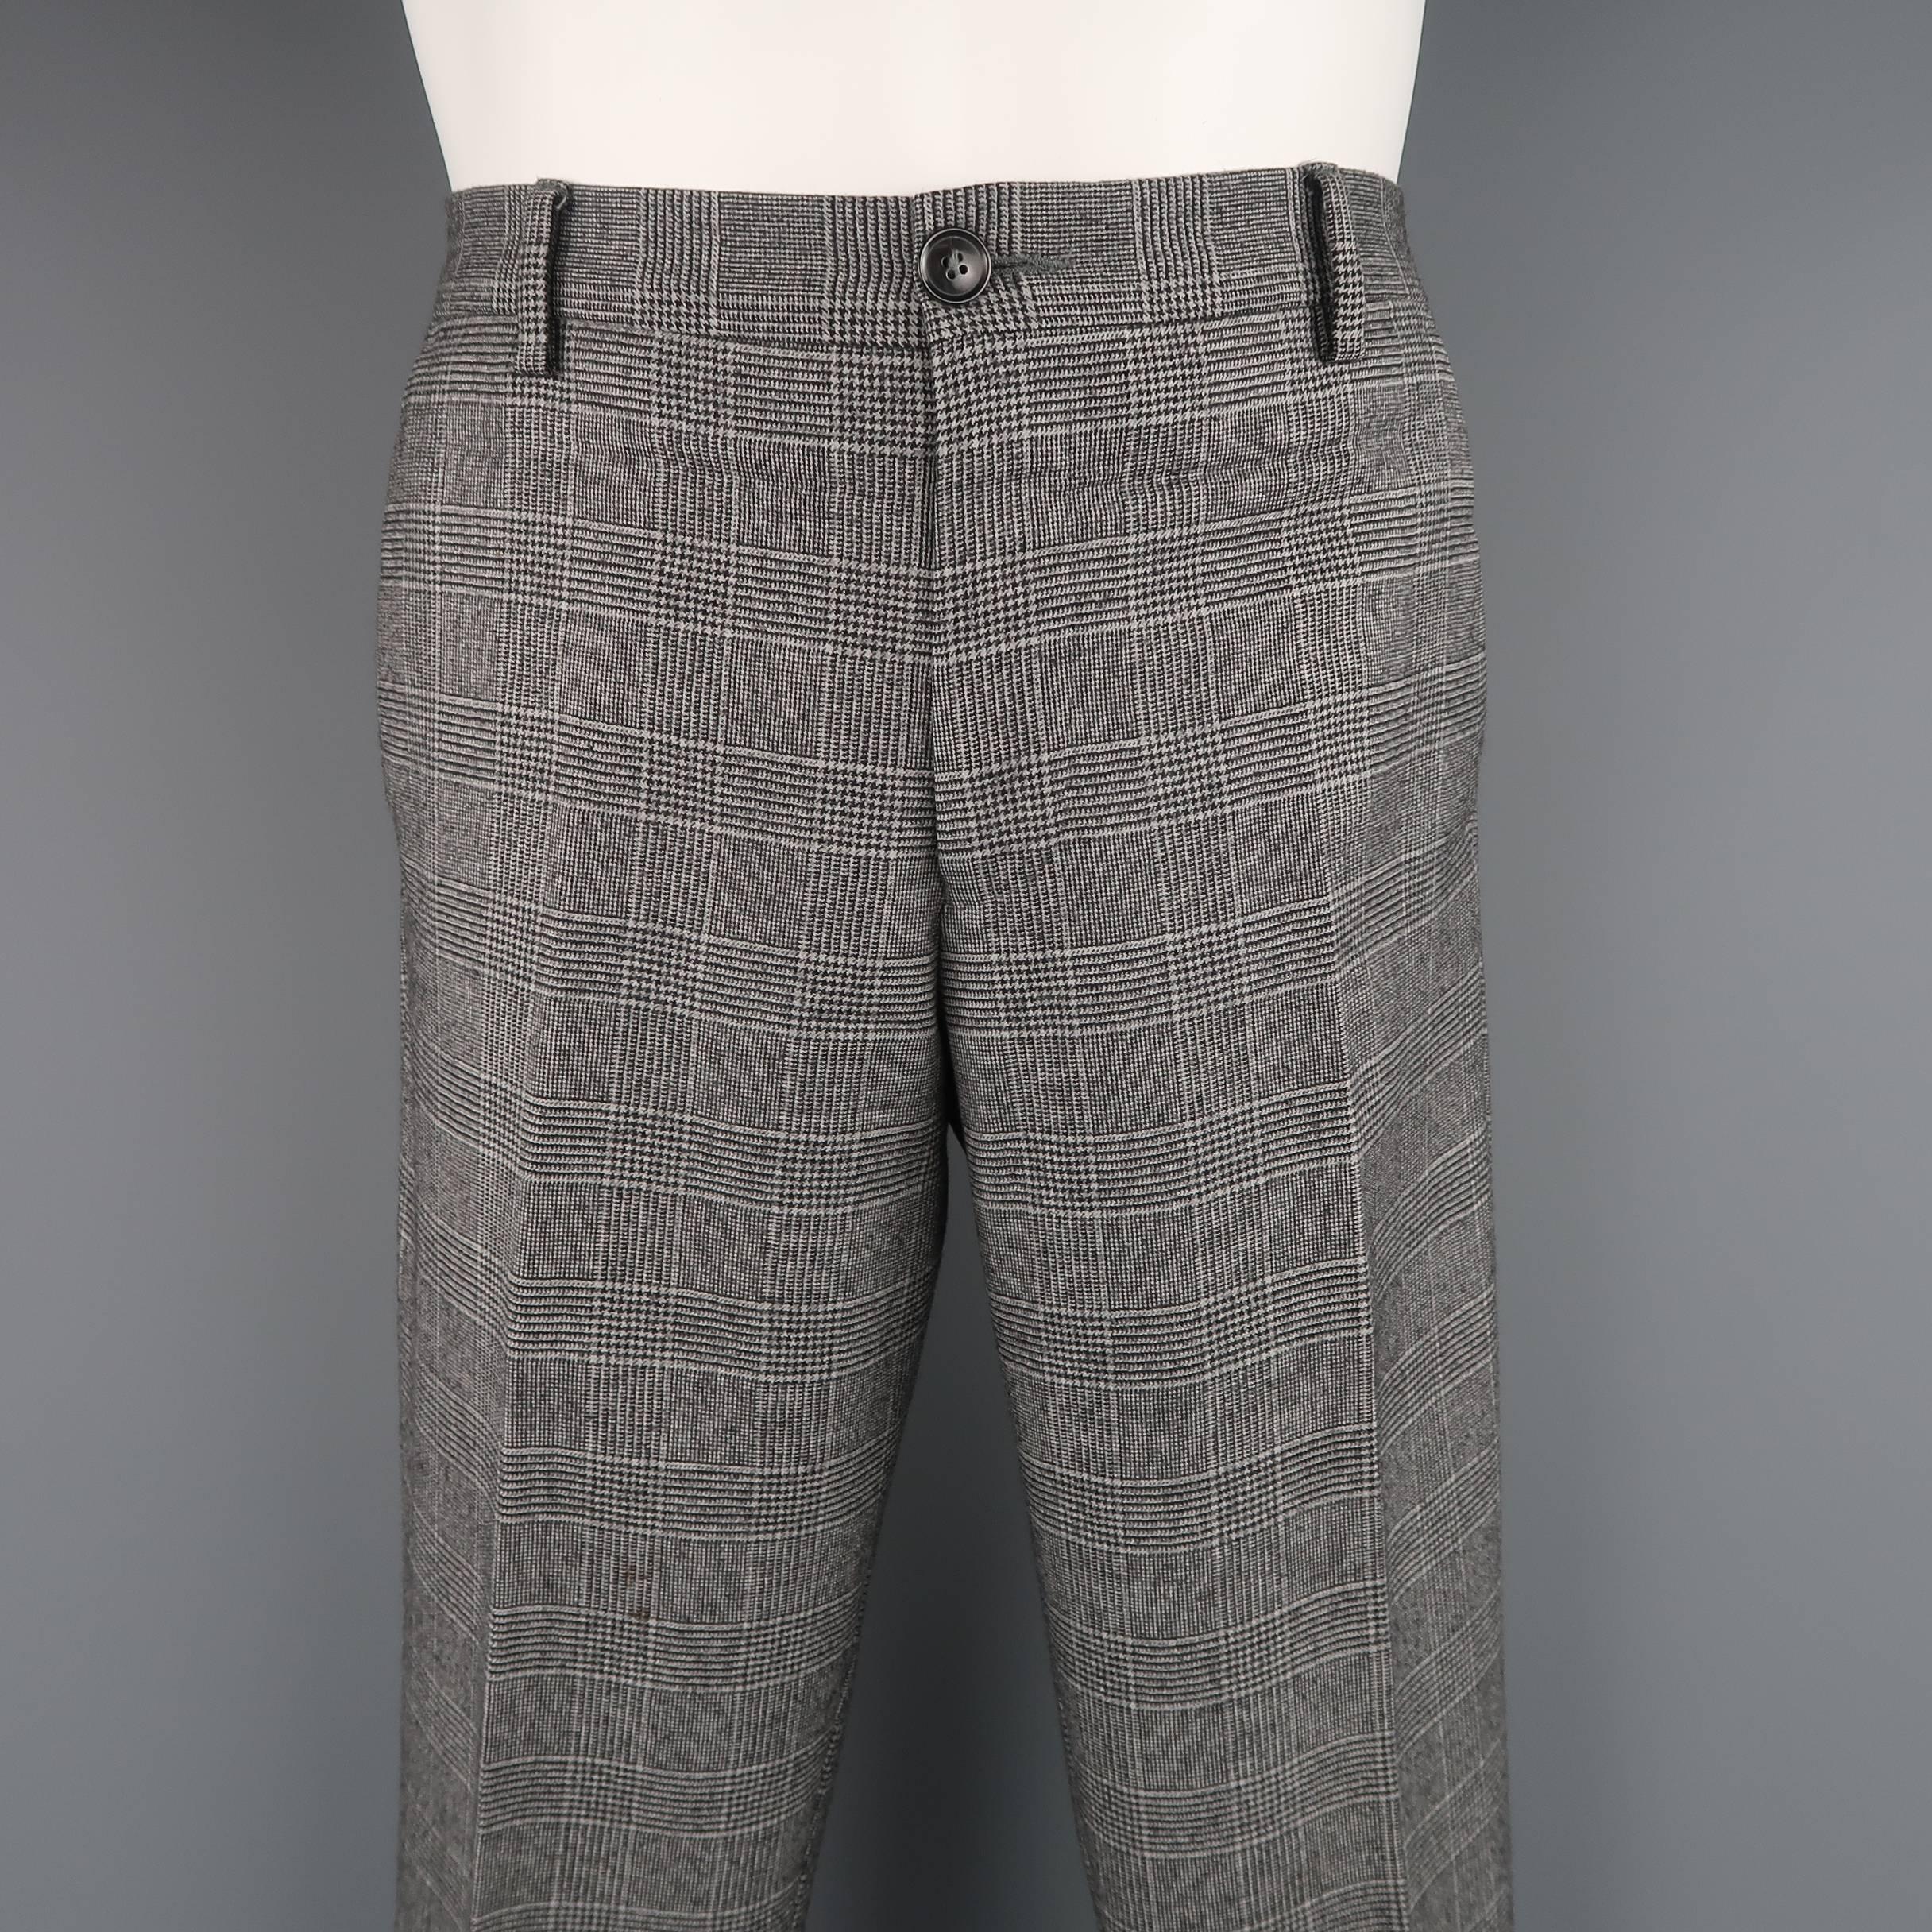 PAUL SMITH dress pants come in light gray glenplaid print wool with a flat front and classic tapered fit. Made in Italy.
 
Good Pre-Owned Condition.
Marked: 32
 
Measurements:
 
Waist: 32 in. (+1 in. )
Rise: 10 in.
Inseam: 32 in. (+2 in. )
 
(Let